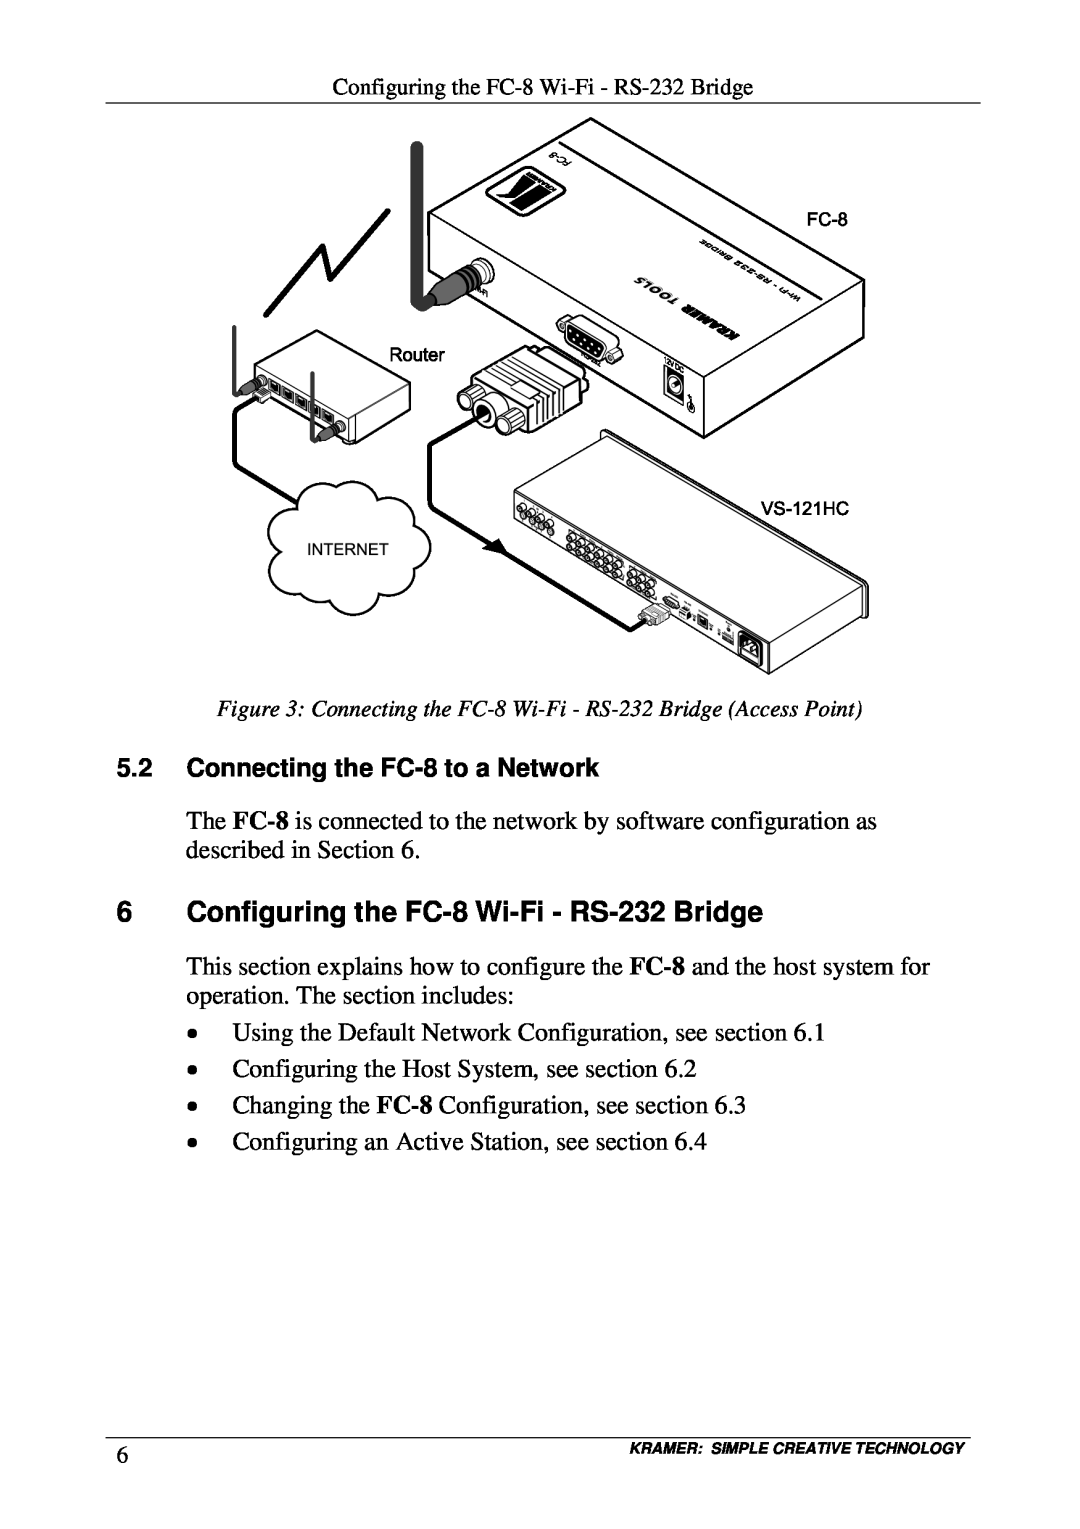 Kramer Electronics user manual Configuring the FC-8 Wi-Fi - RS-232 Bridge, Connecting the FC-8 to a Network 